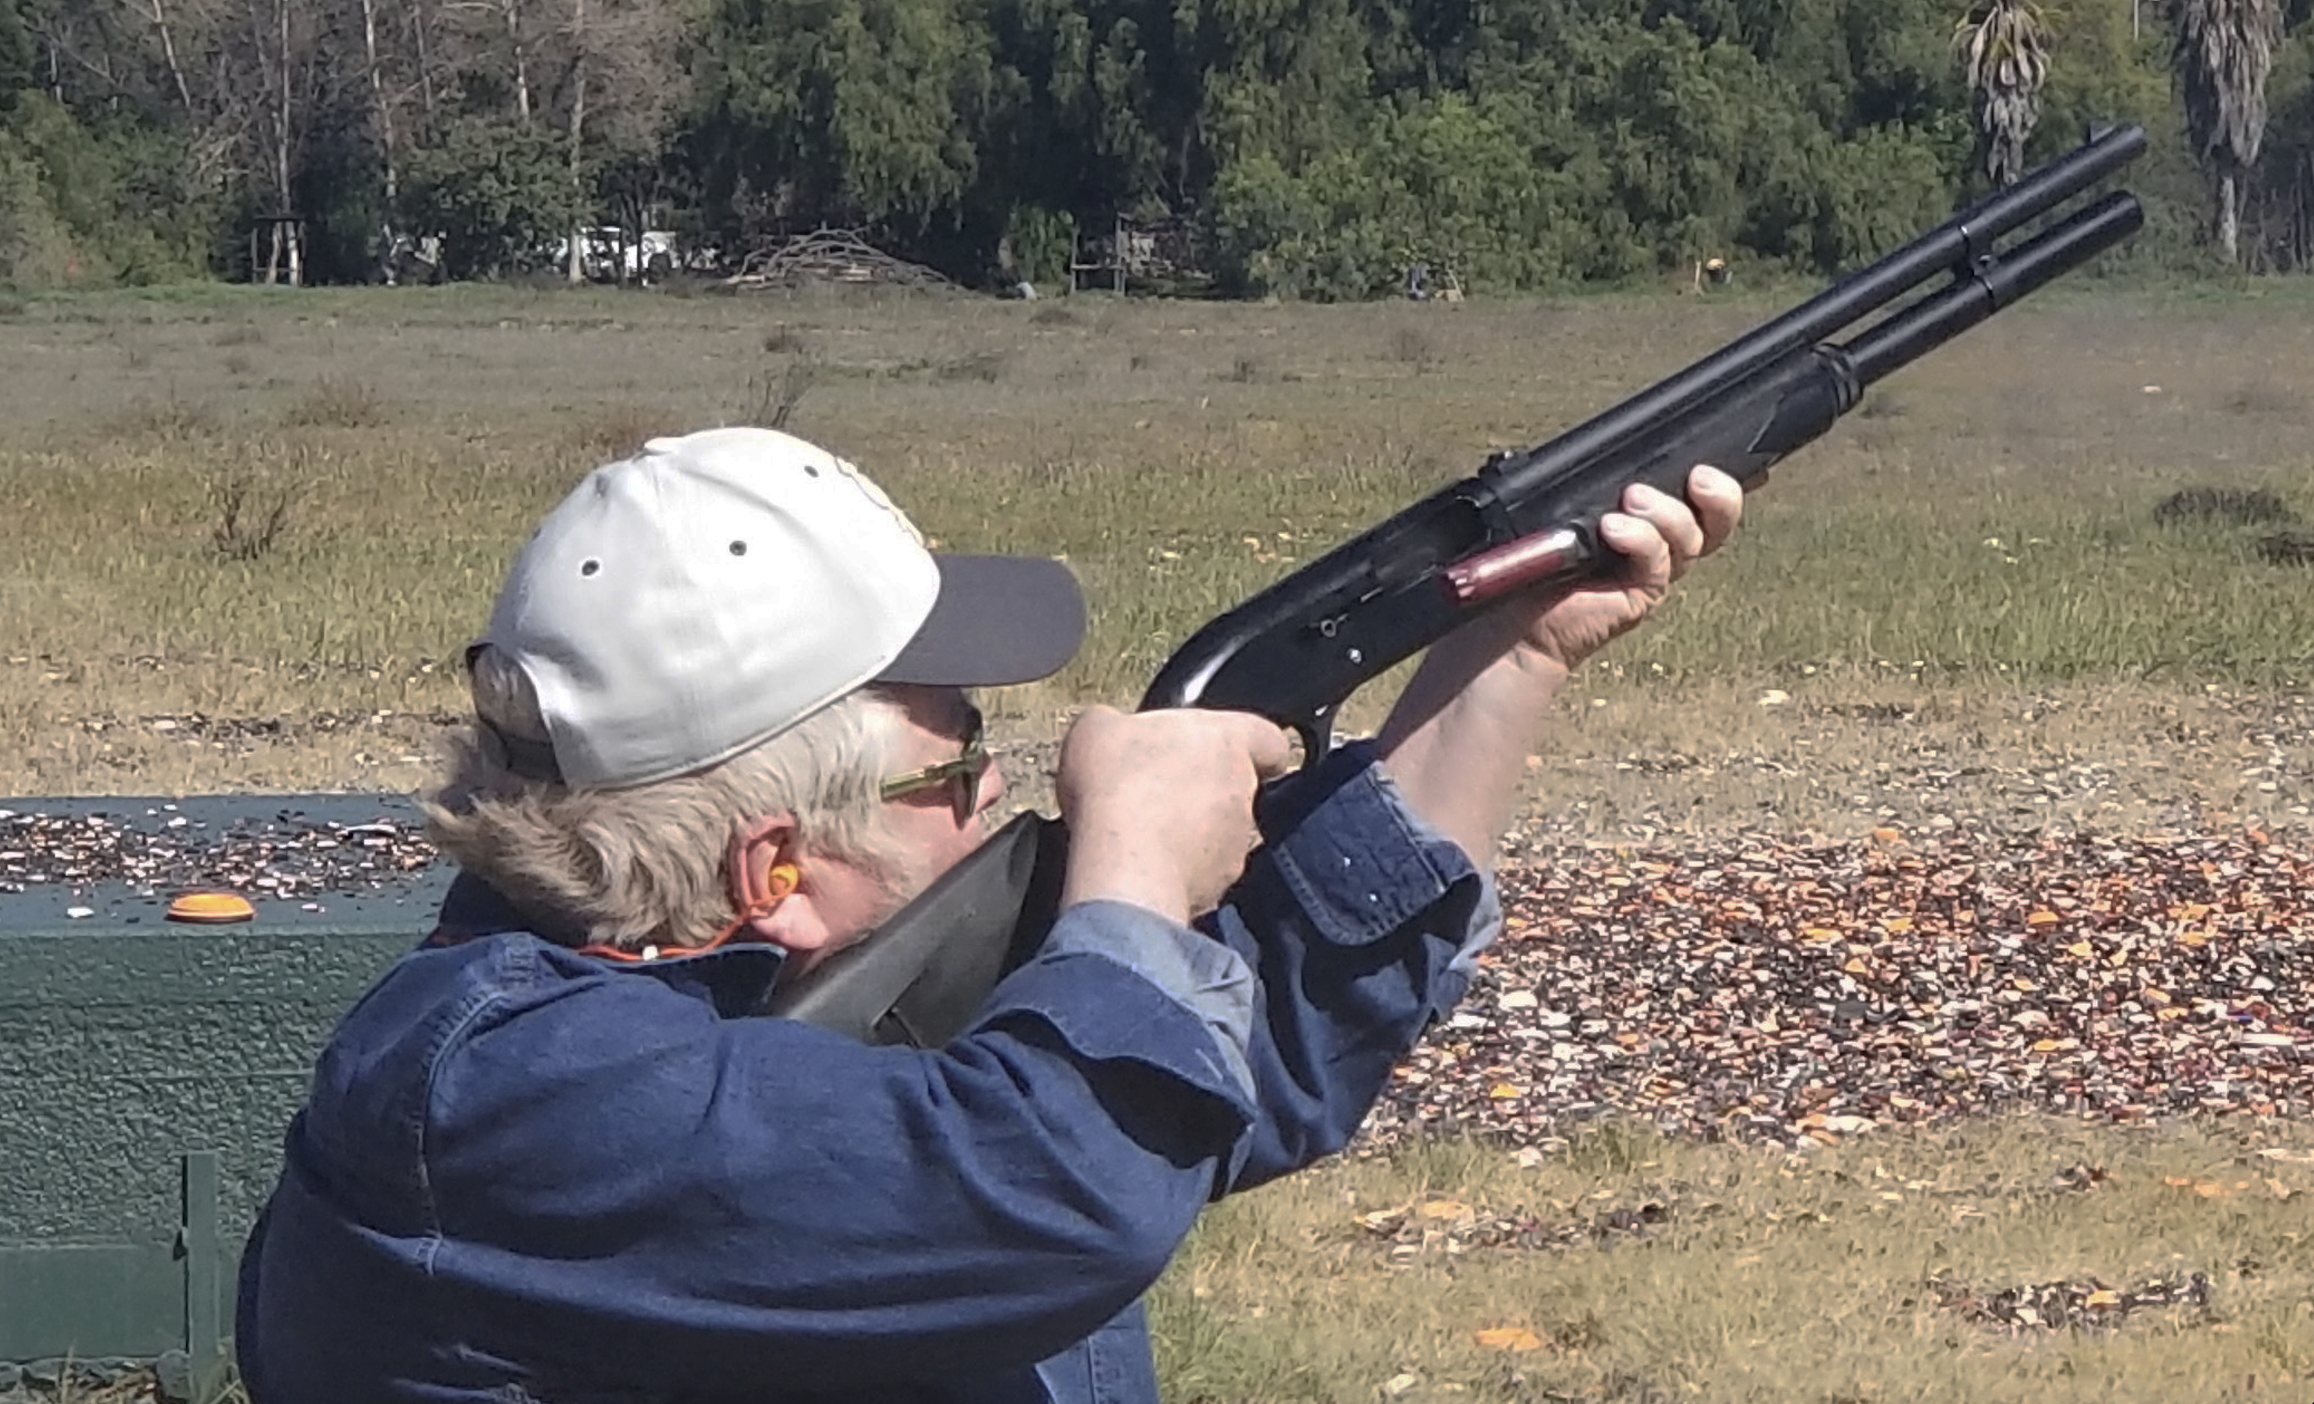 The author shoots a round of skeet with his vintage M1 Super 90.